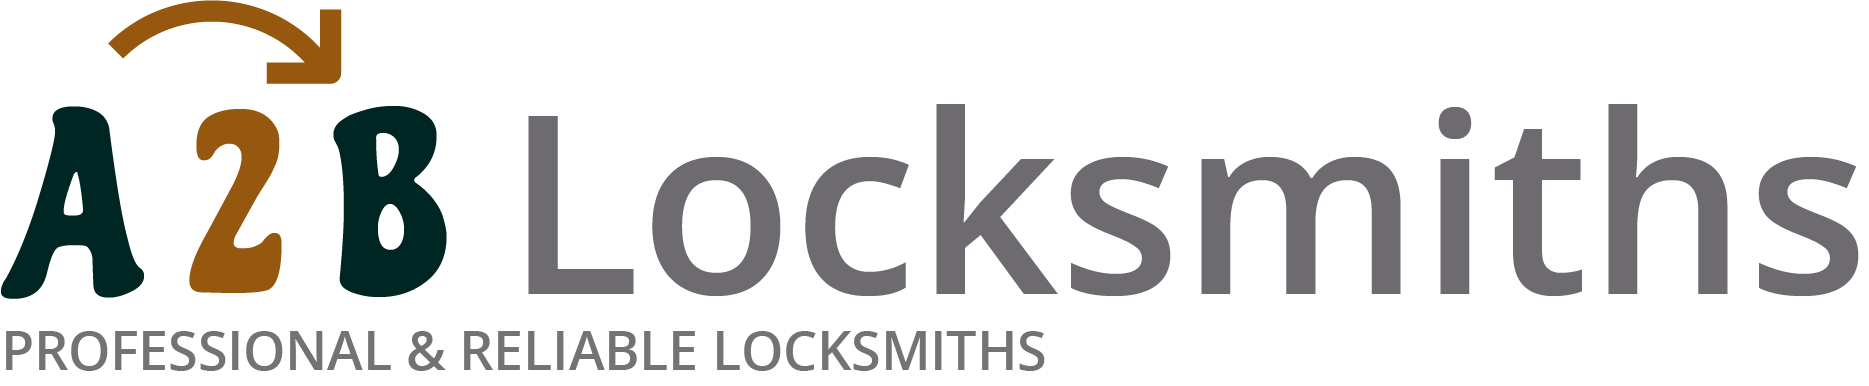 If you are locked out of house in Alnwick, our 24/7 local emergency locksmith services can help you.